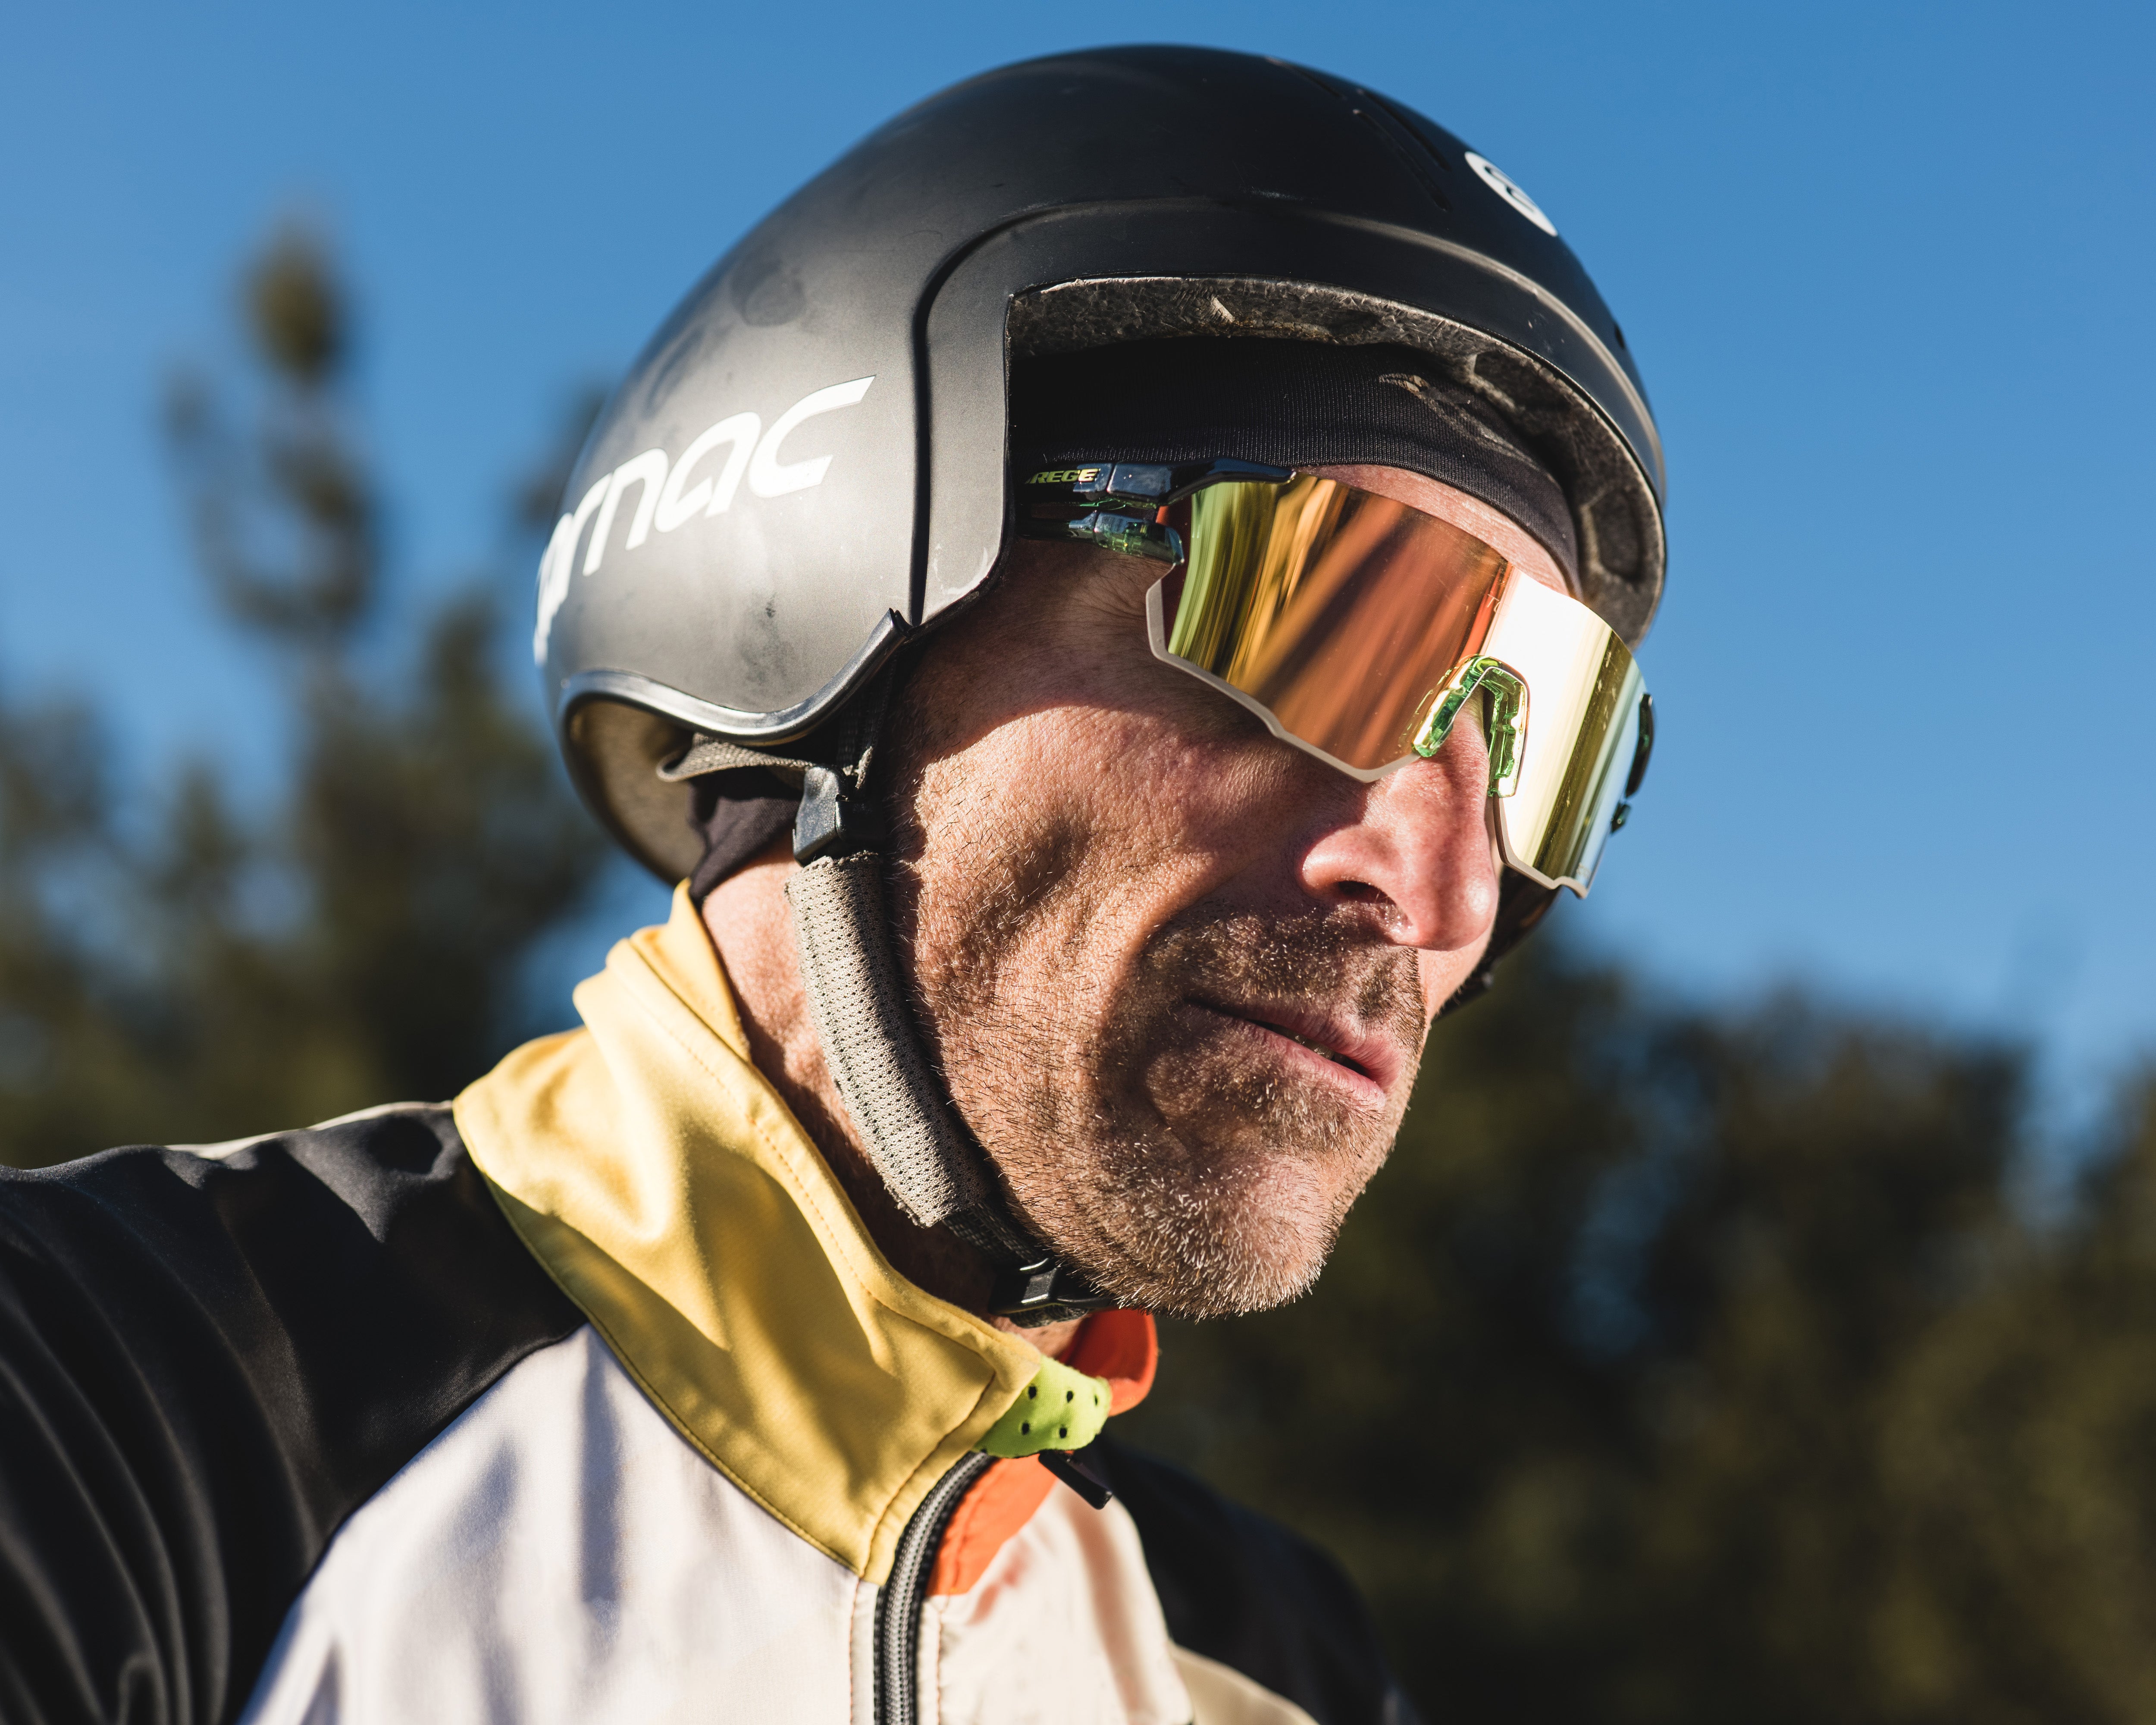 Guide to Choosing the Right Sports Sunglasses Lenses for Your Needs